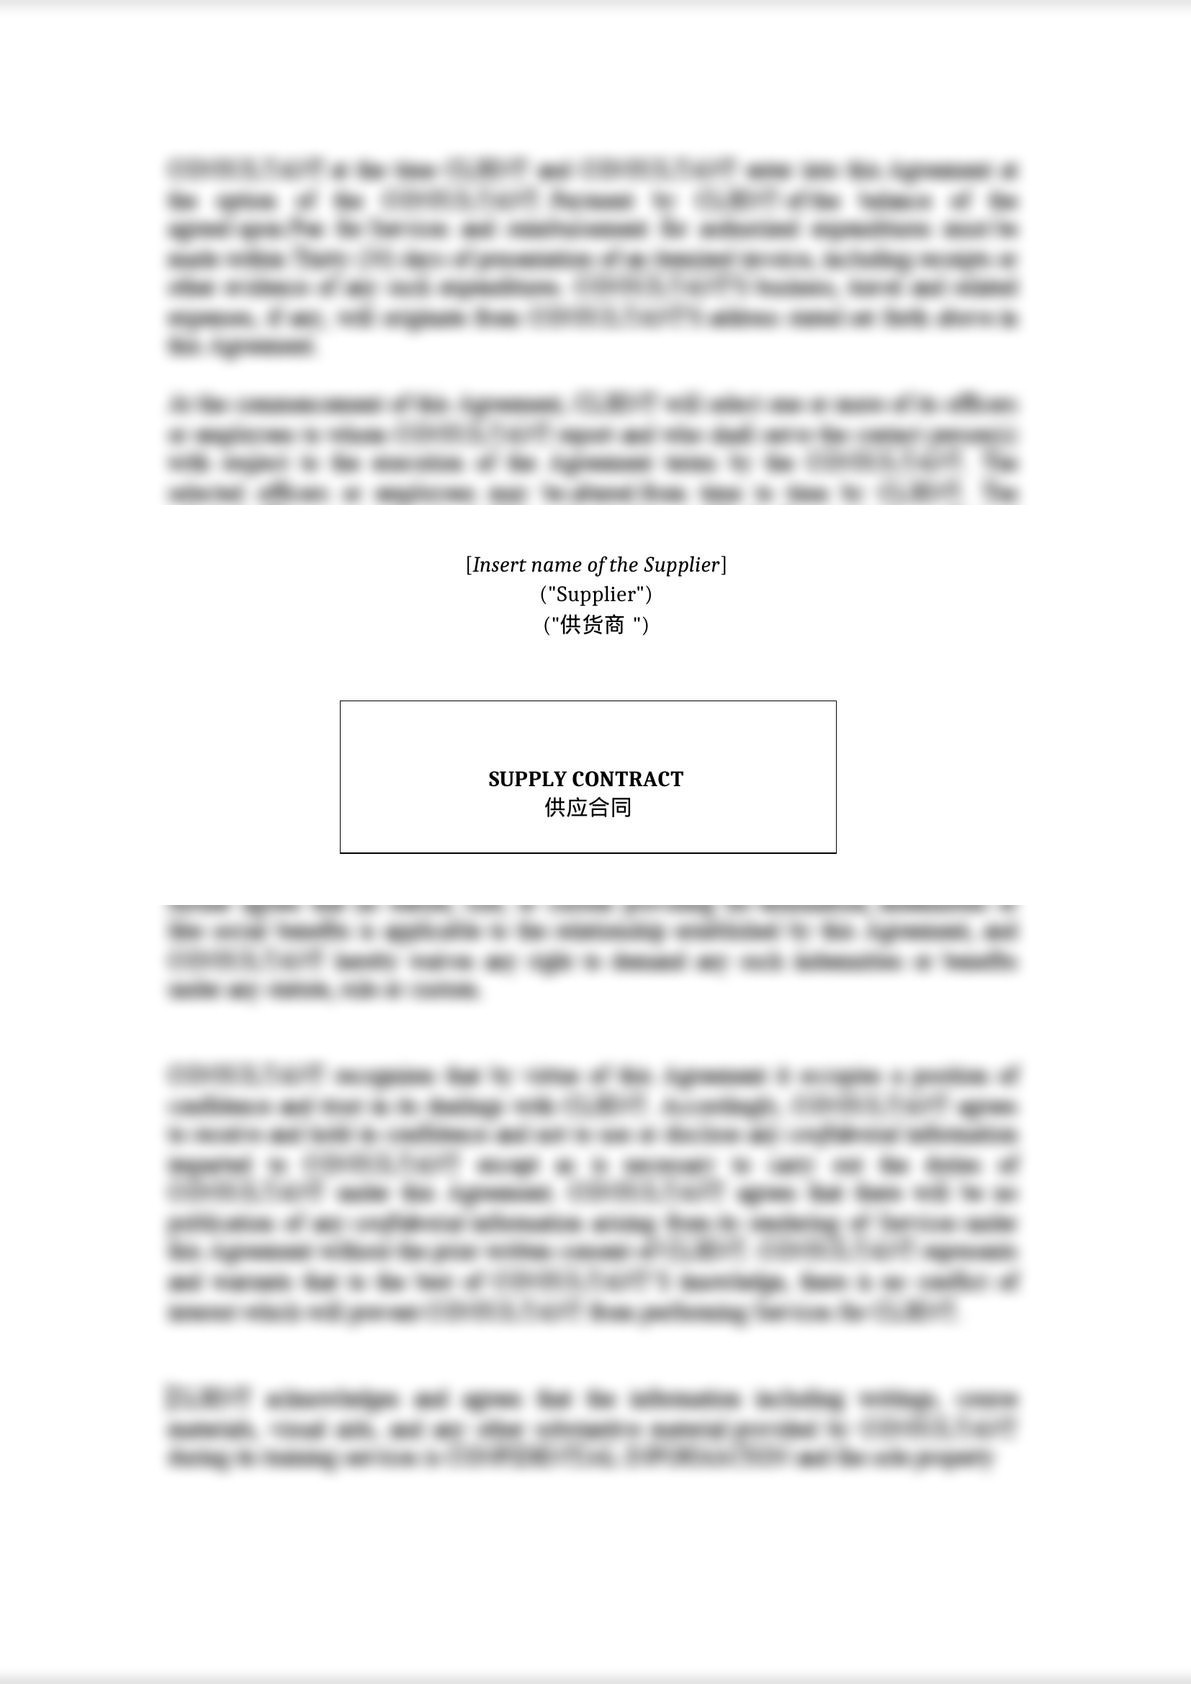 Supply Contract Template in Both English and Chinese -0